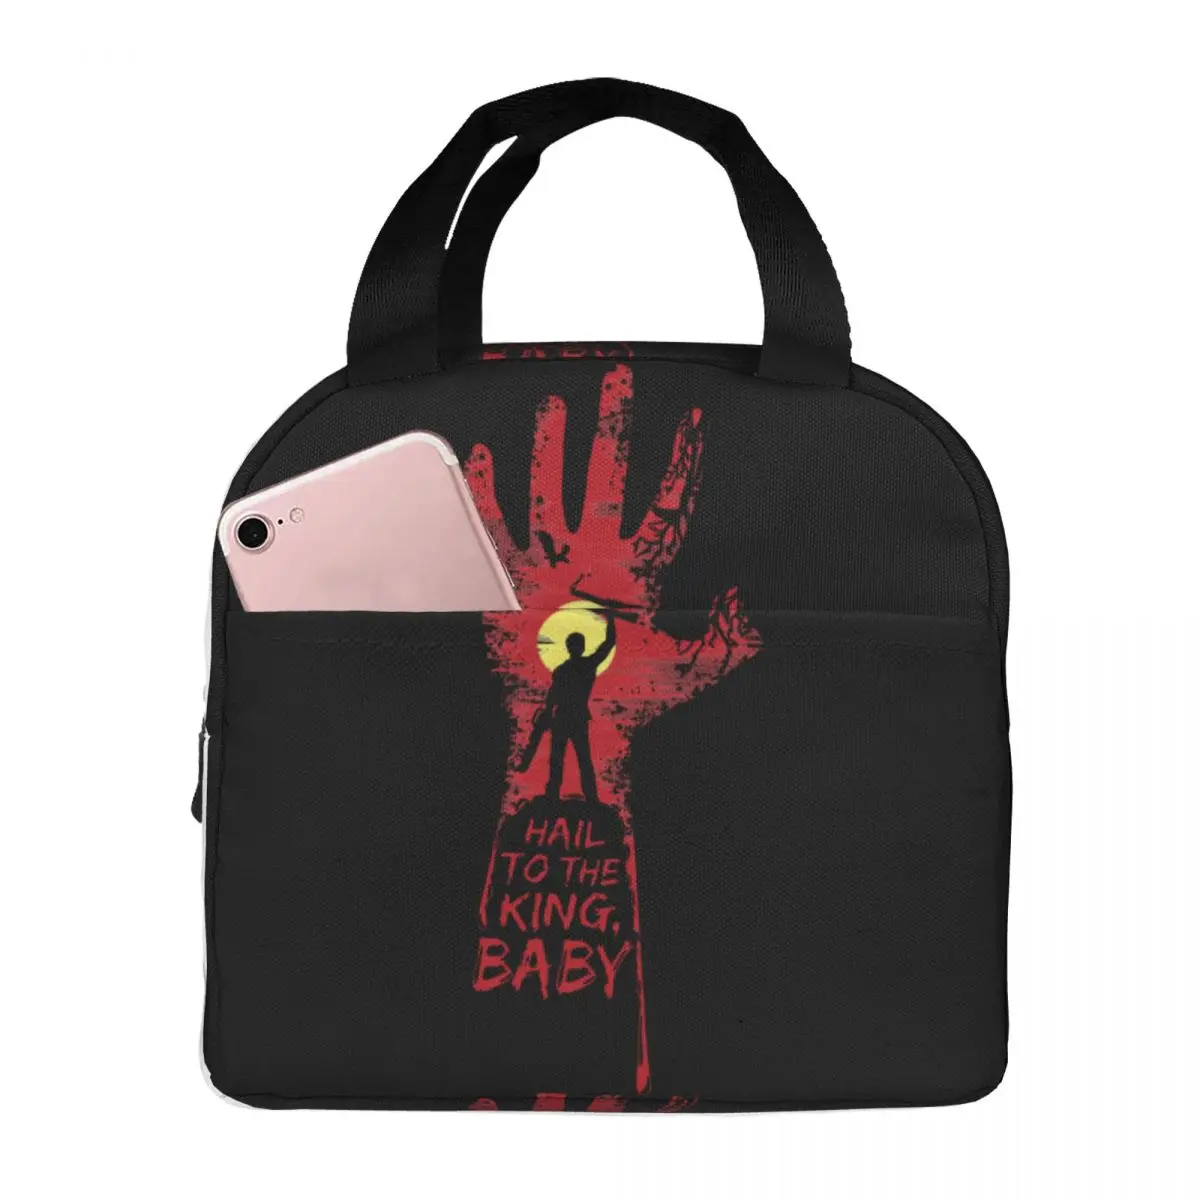 Lunch Bag for Men Women Hail To The King Baby Evil Dead Insulated Cooler Bags Portable School Horror Movie Canvas Tote Food Bag